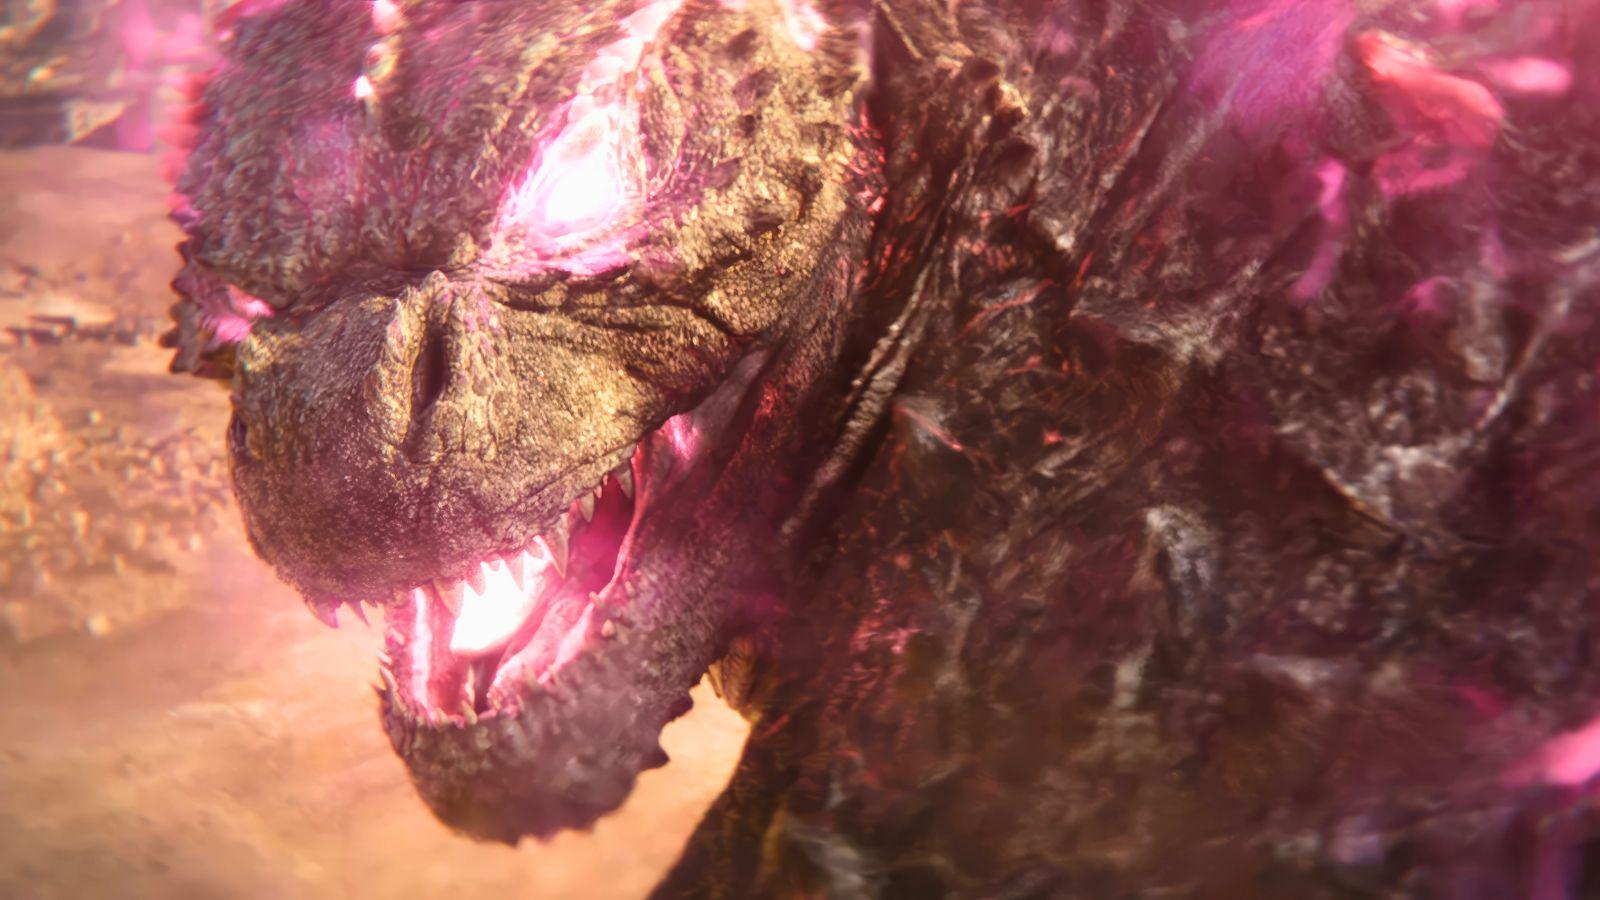 Godzilla in Godzilla x Kong: The New Empire. He turns to face the camera with pink glowing eyes and a mouth.